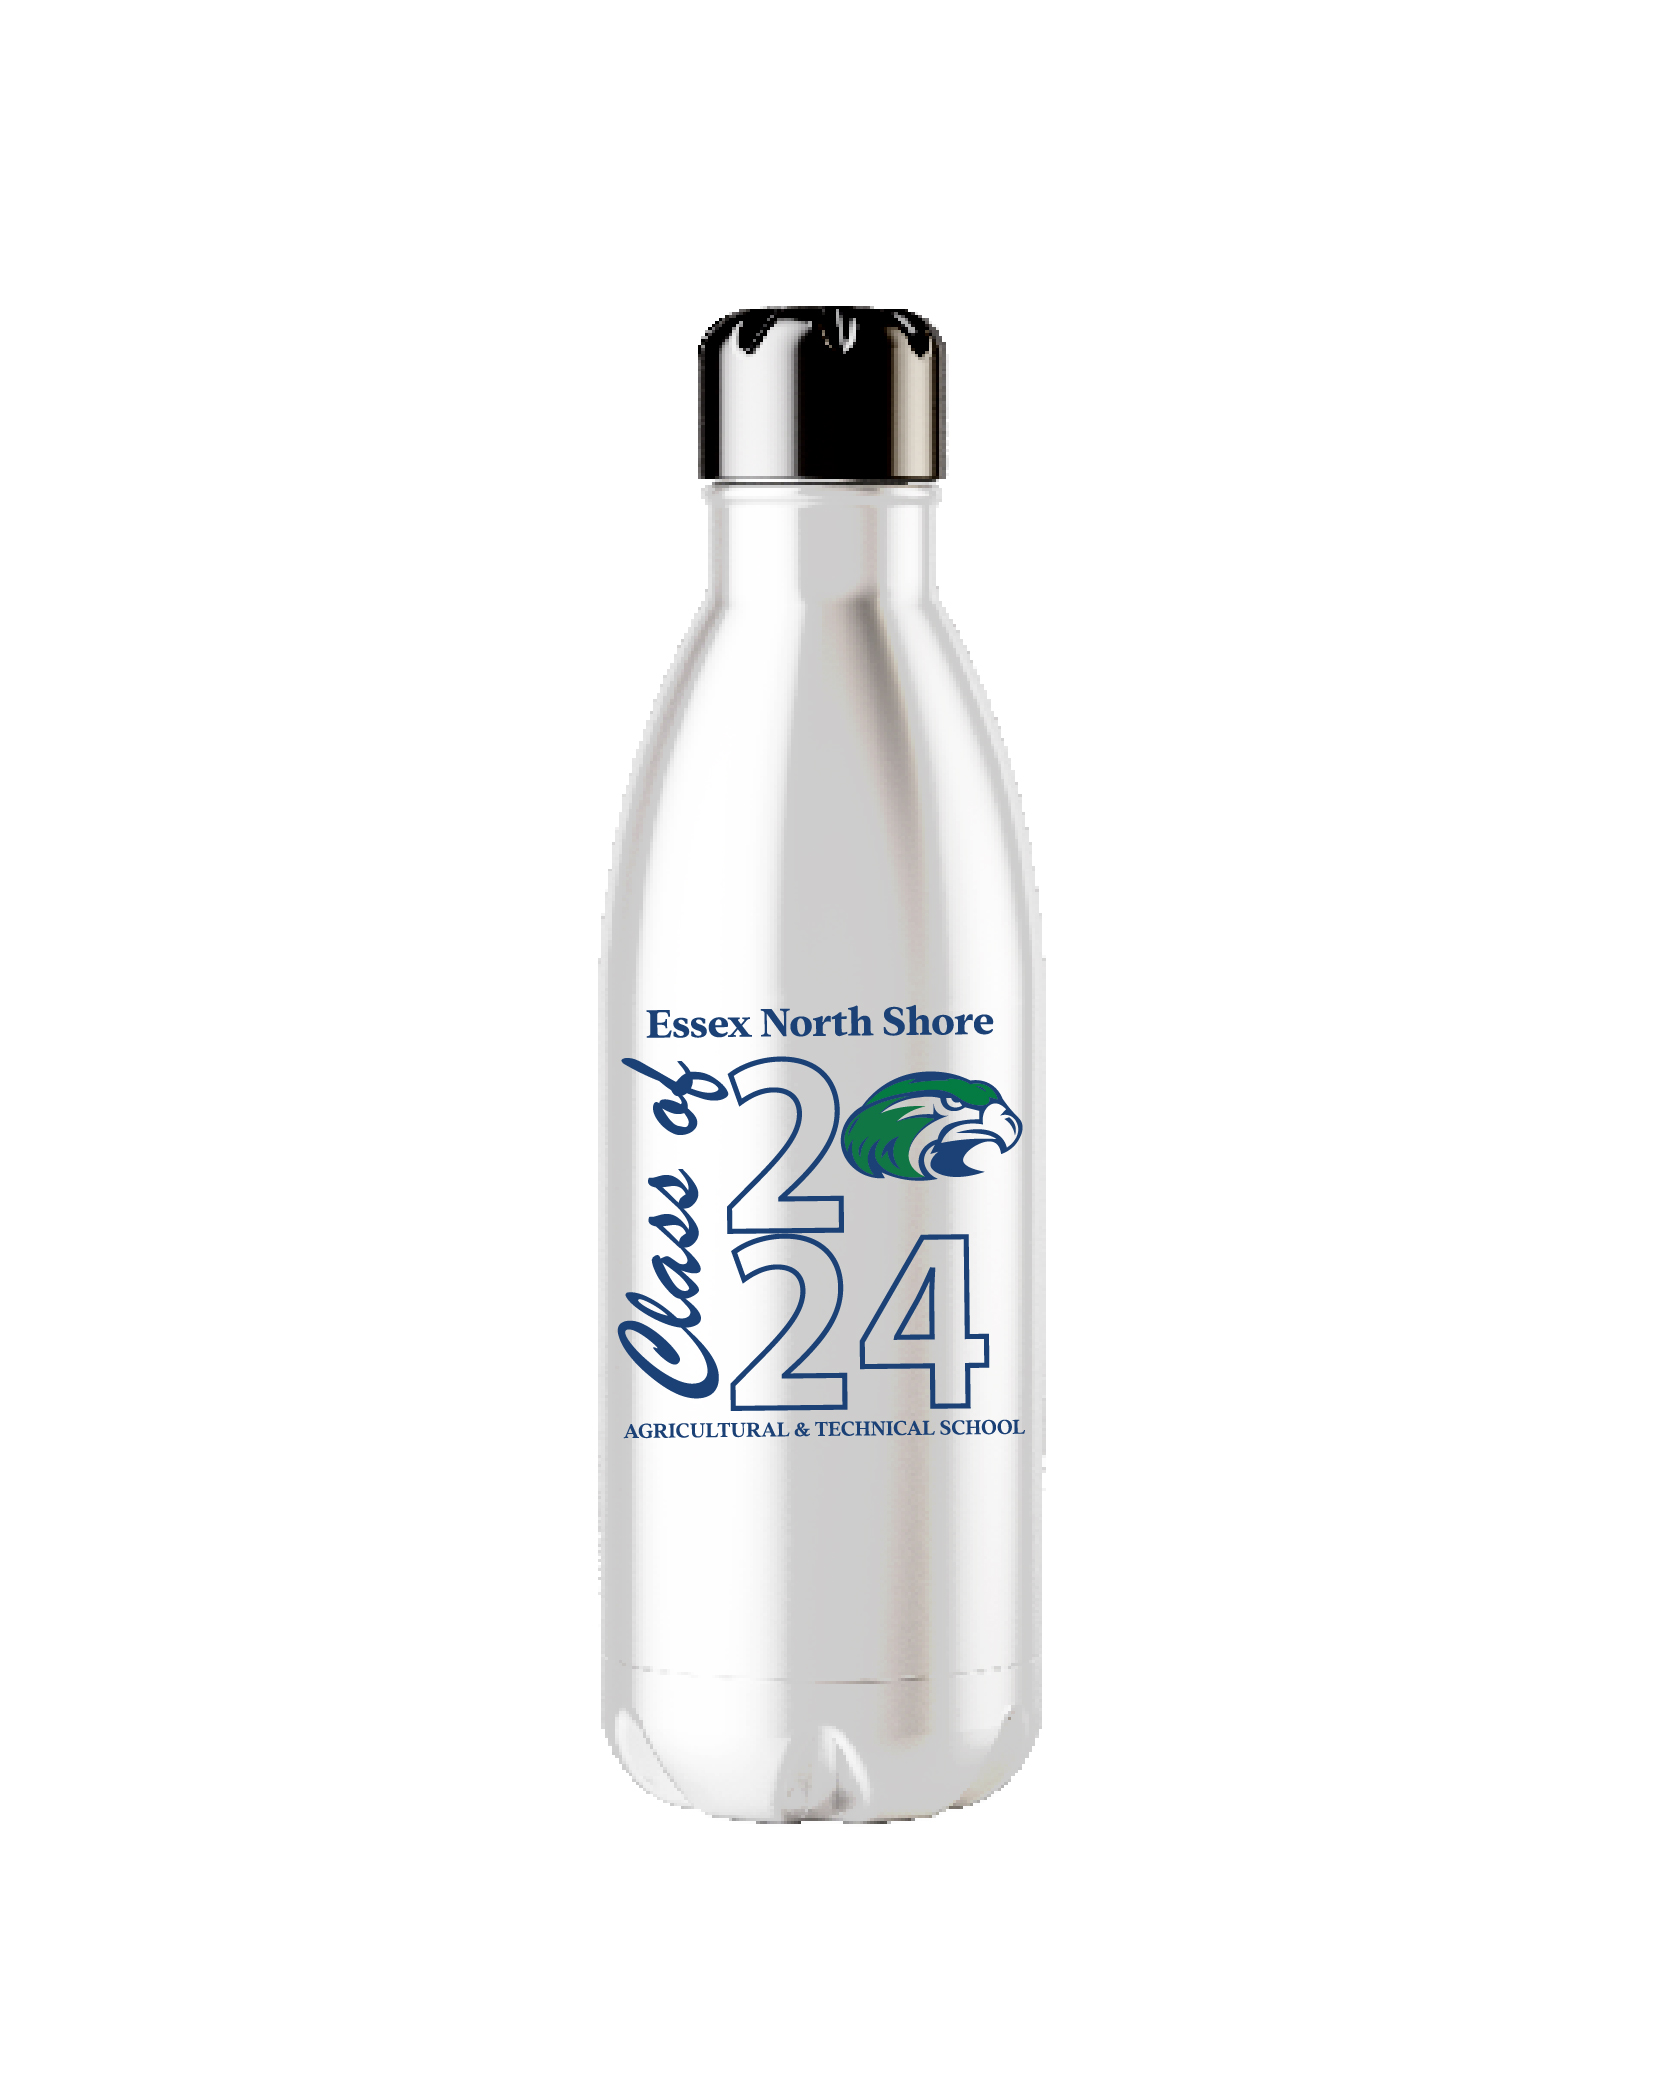 Essex North Shore PTO CLASS OF 2024 STAINLESS STEEL WATER BOTTLE - 17OZ